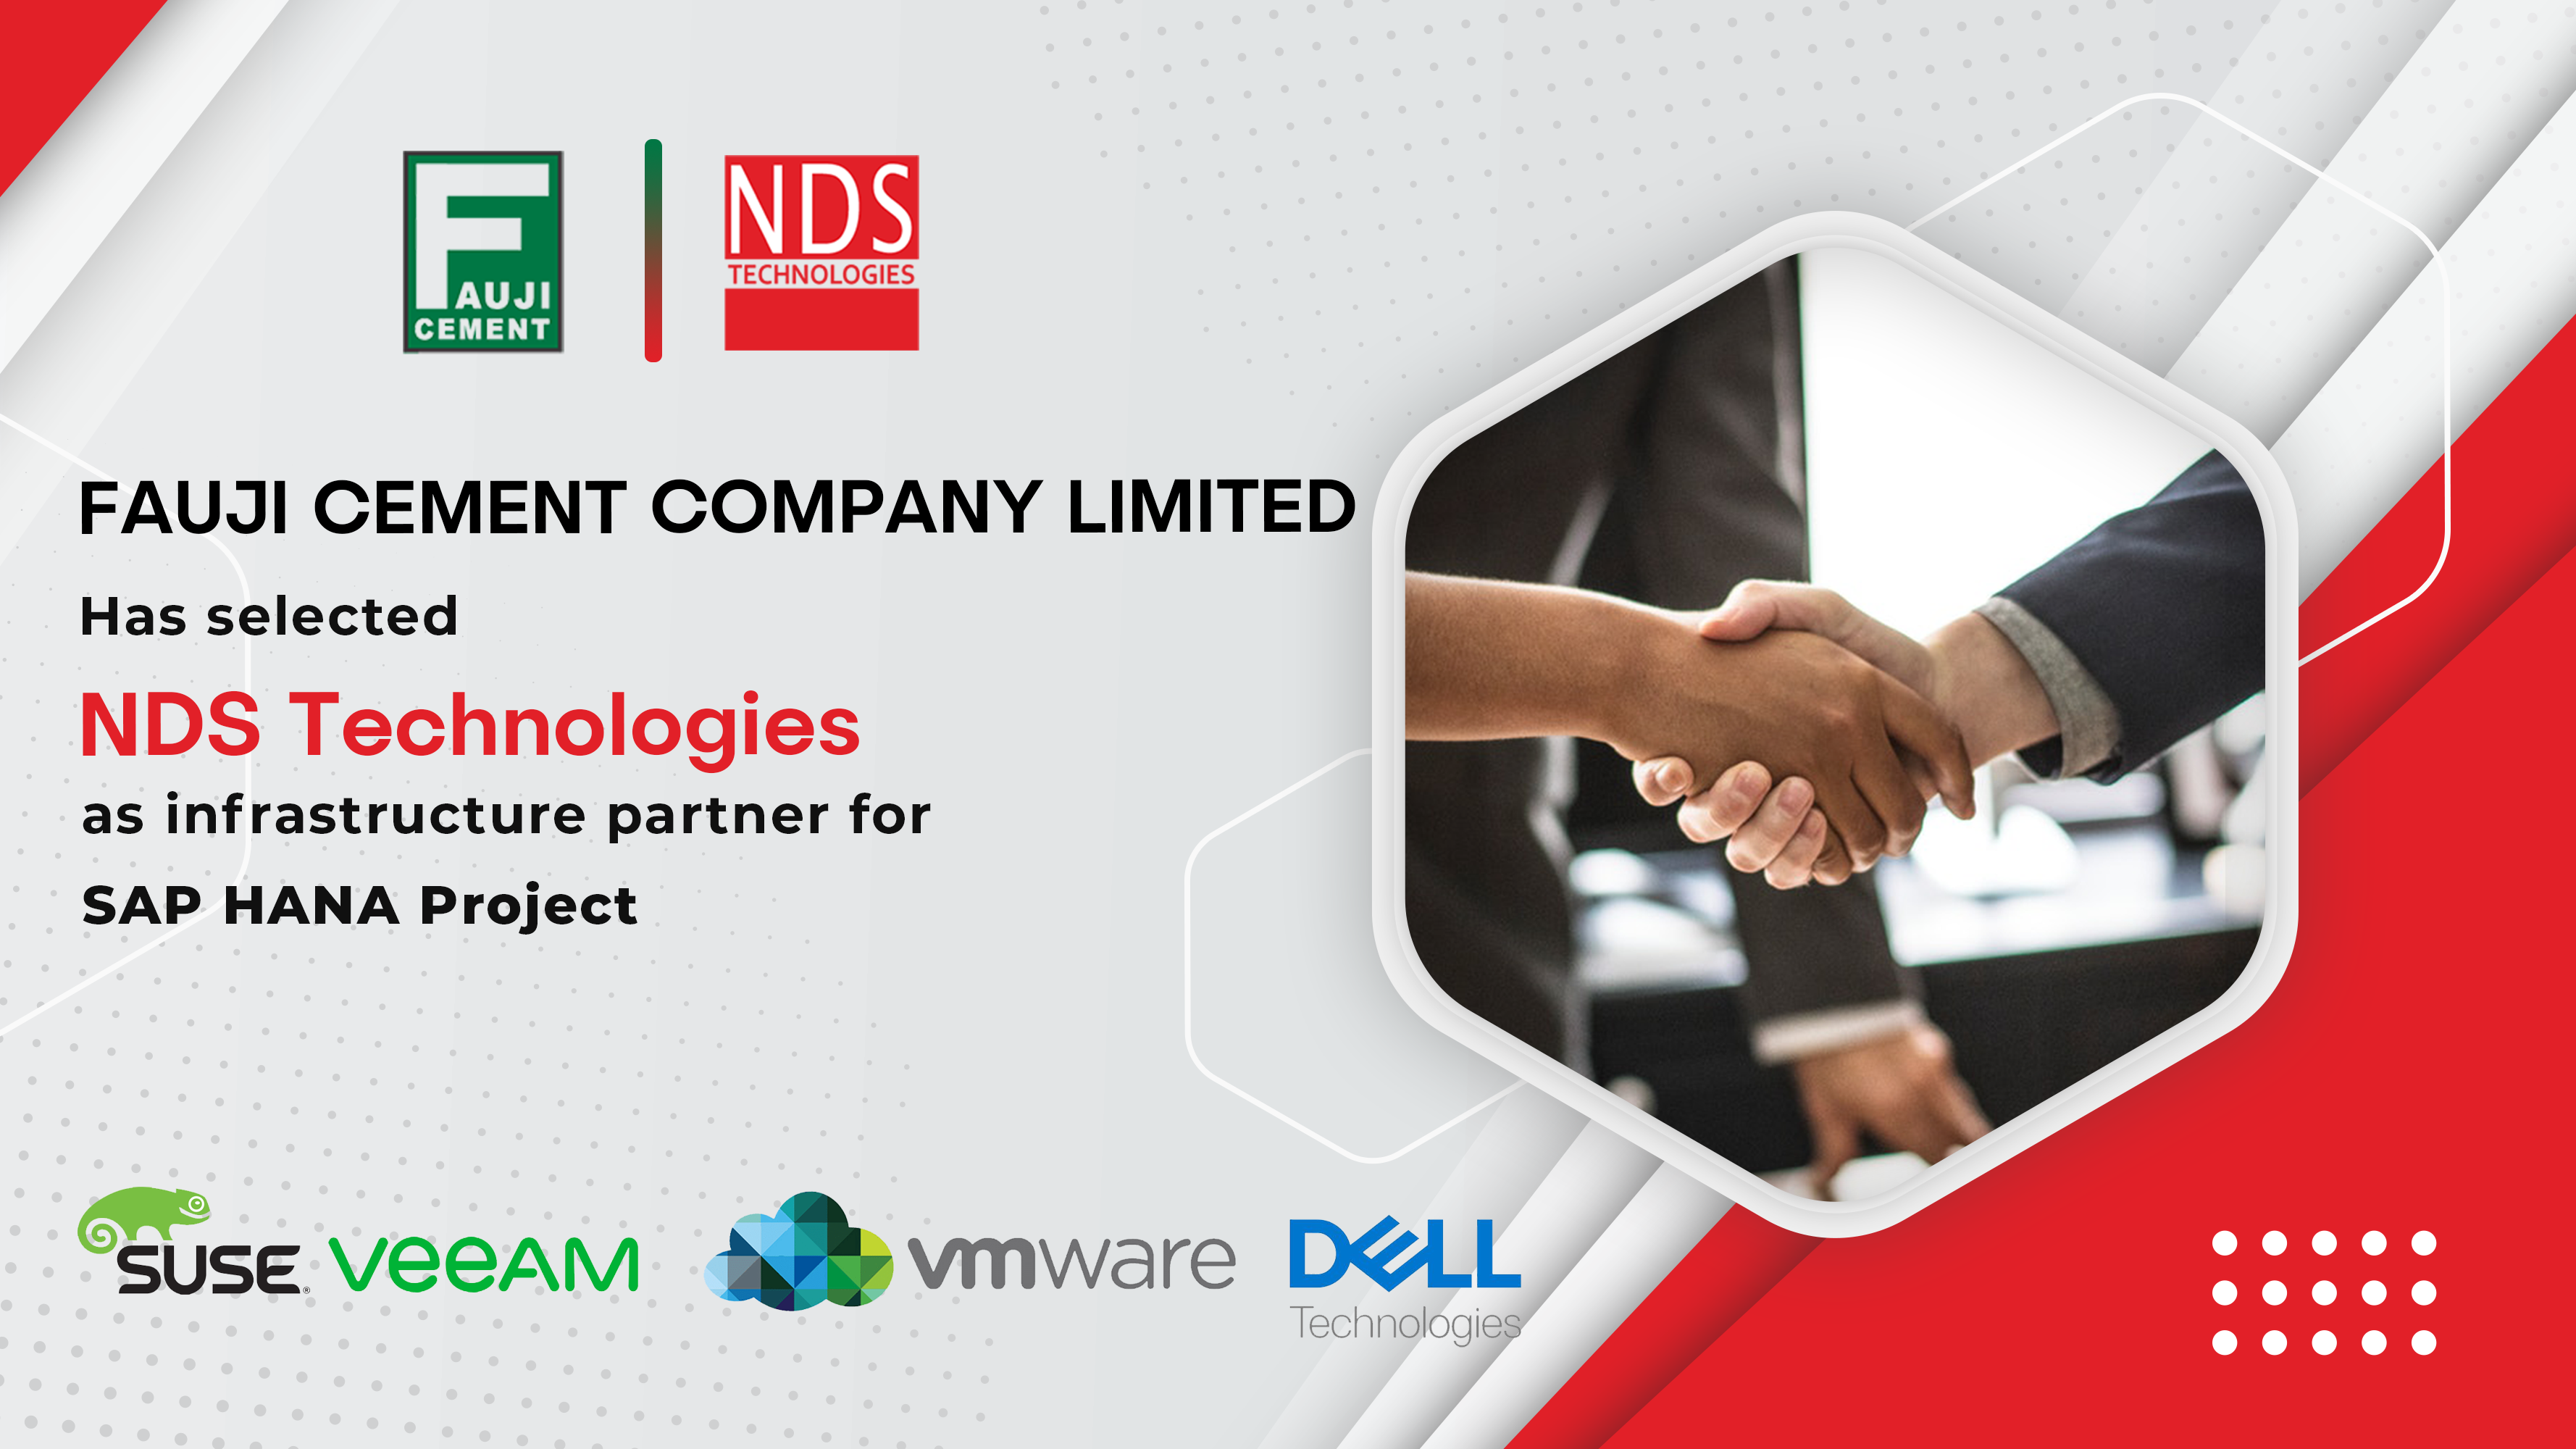 NDS Technologies Pvt Limited is now a Fauji Cement